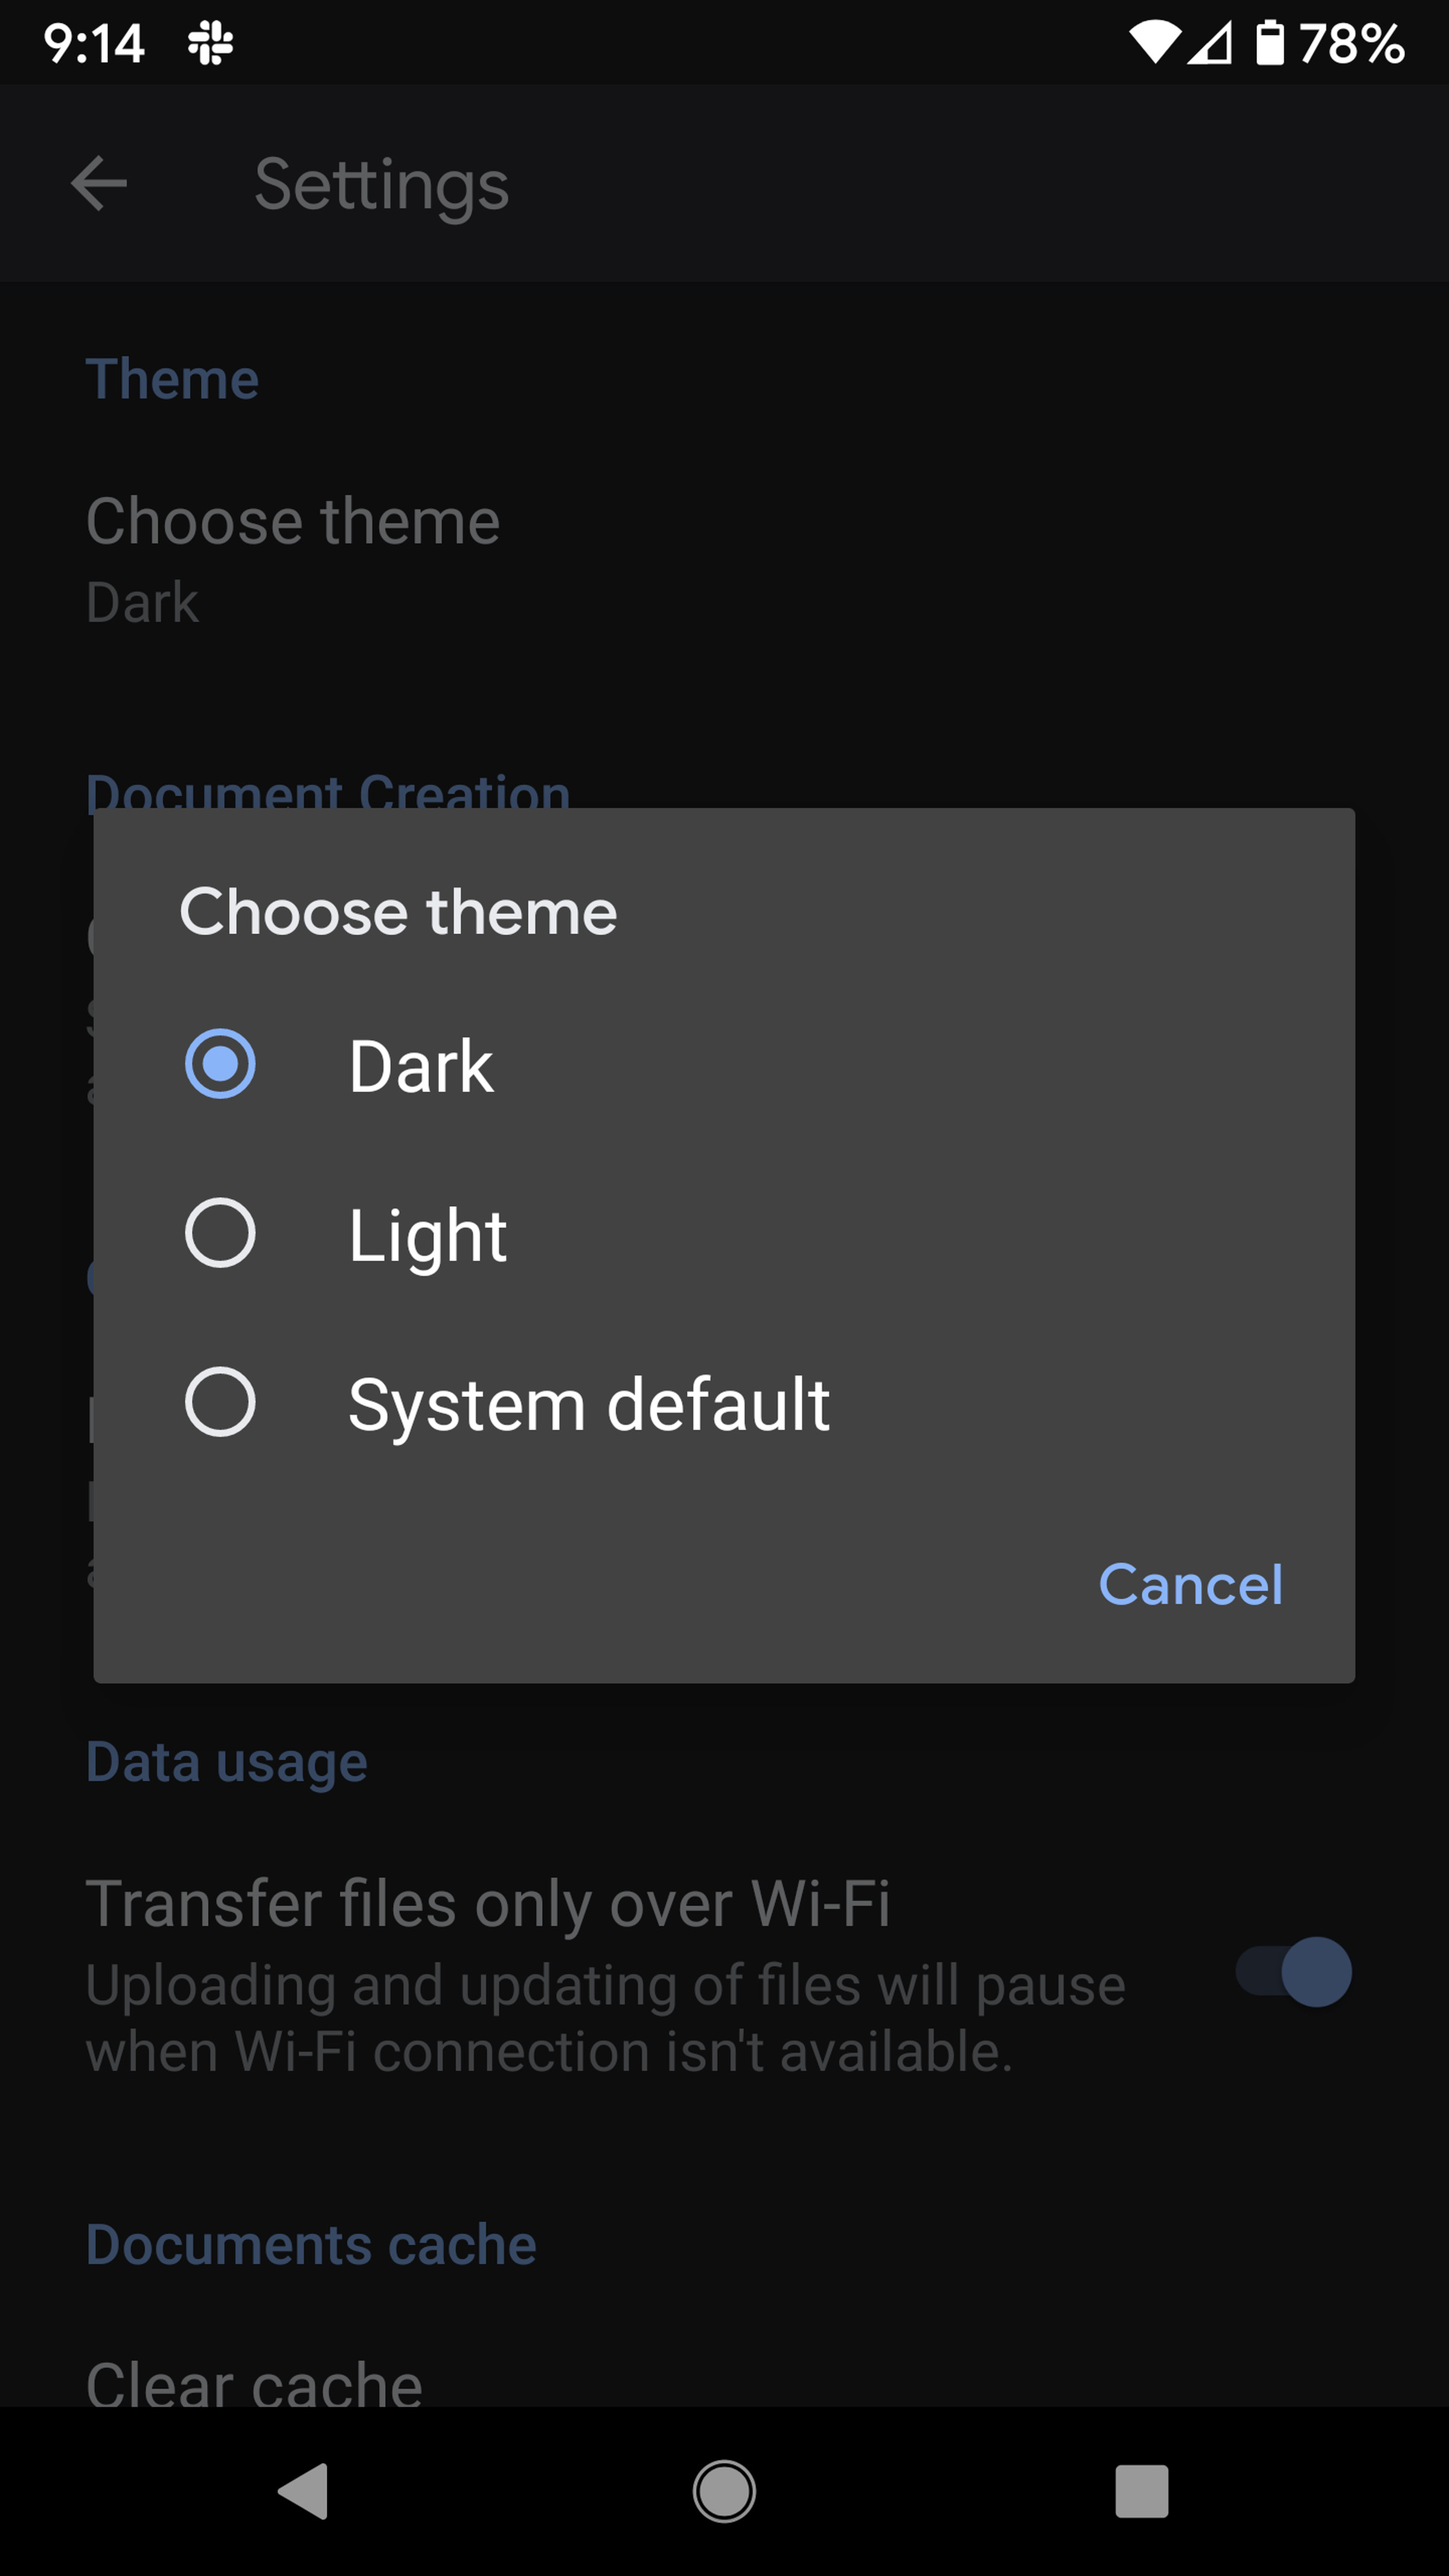 You can choose dark or light modes, or just go with the system default.